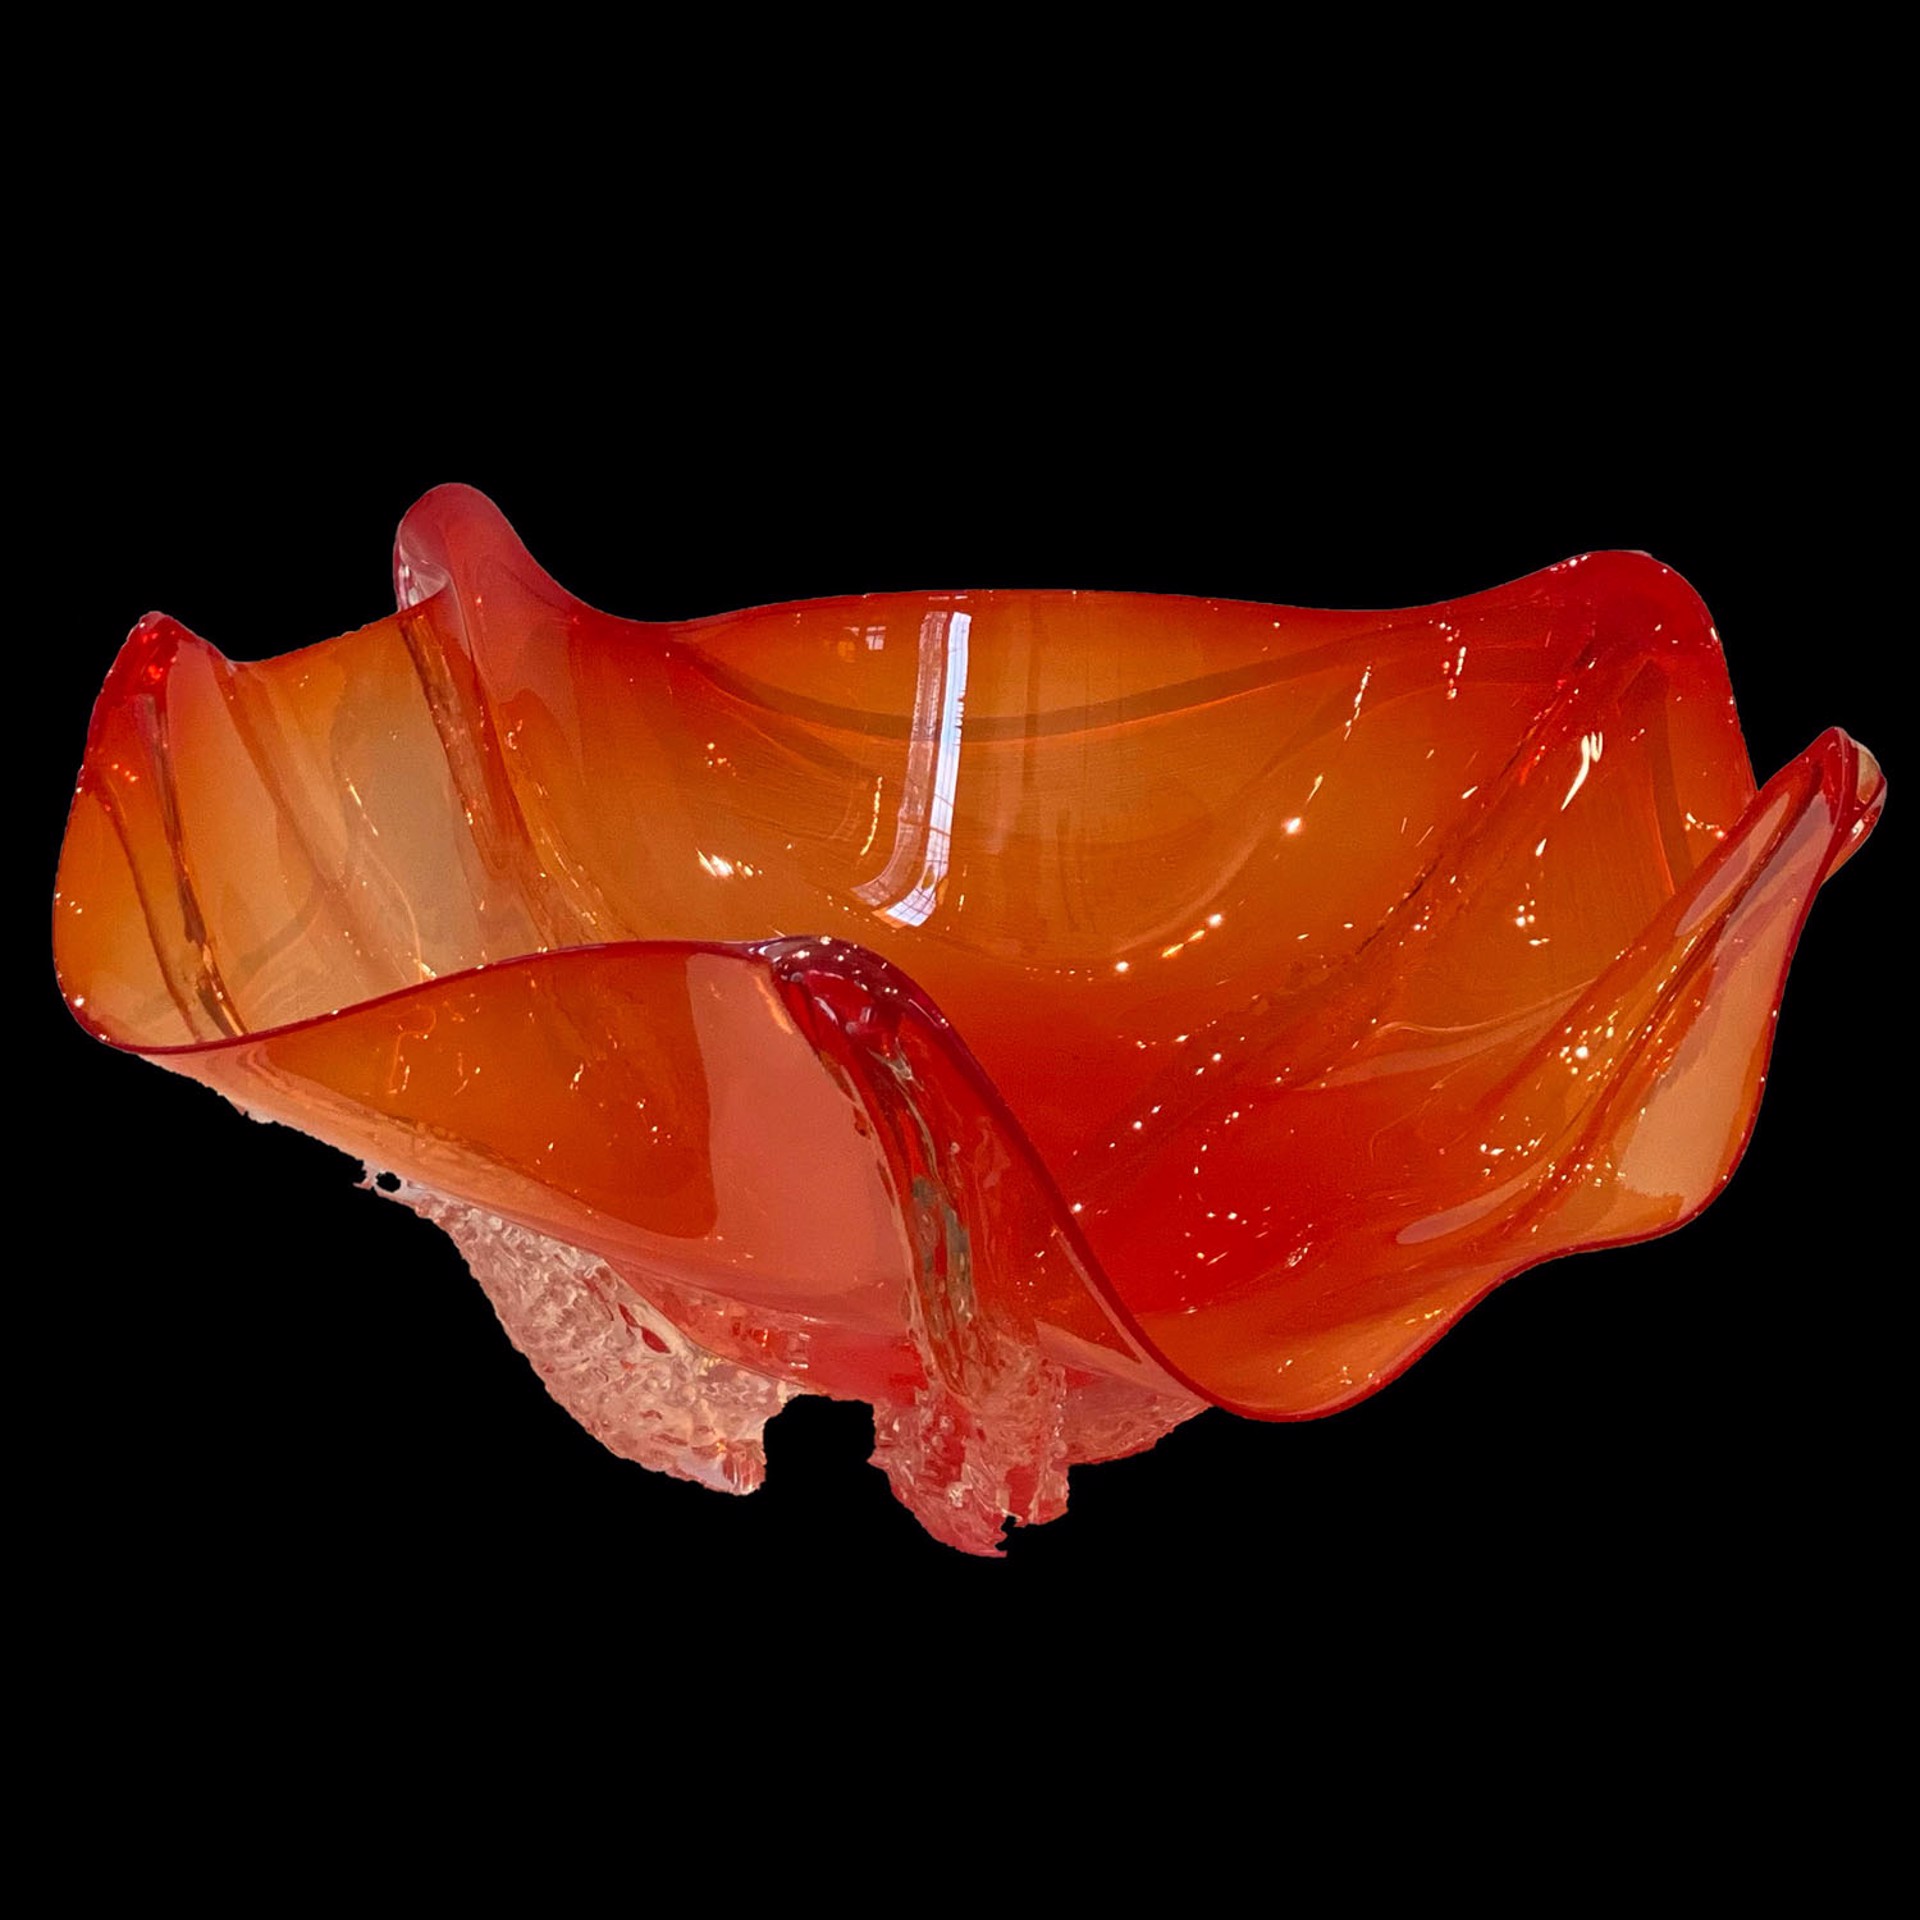 Orange Octo Bowl by Will Dexter